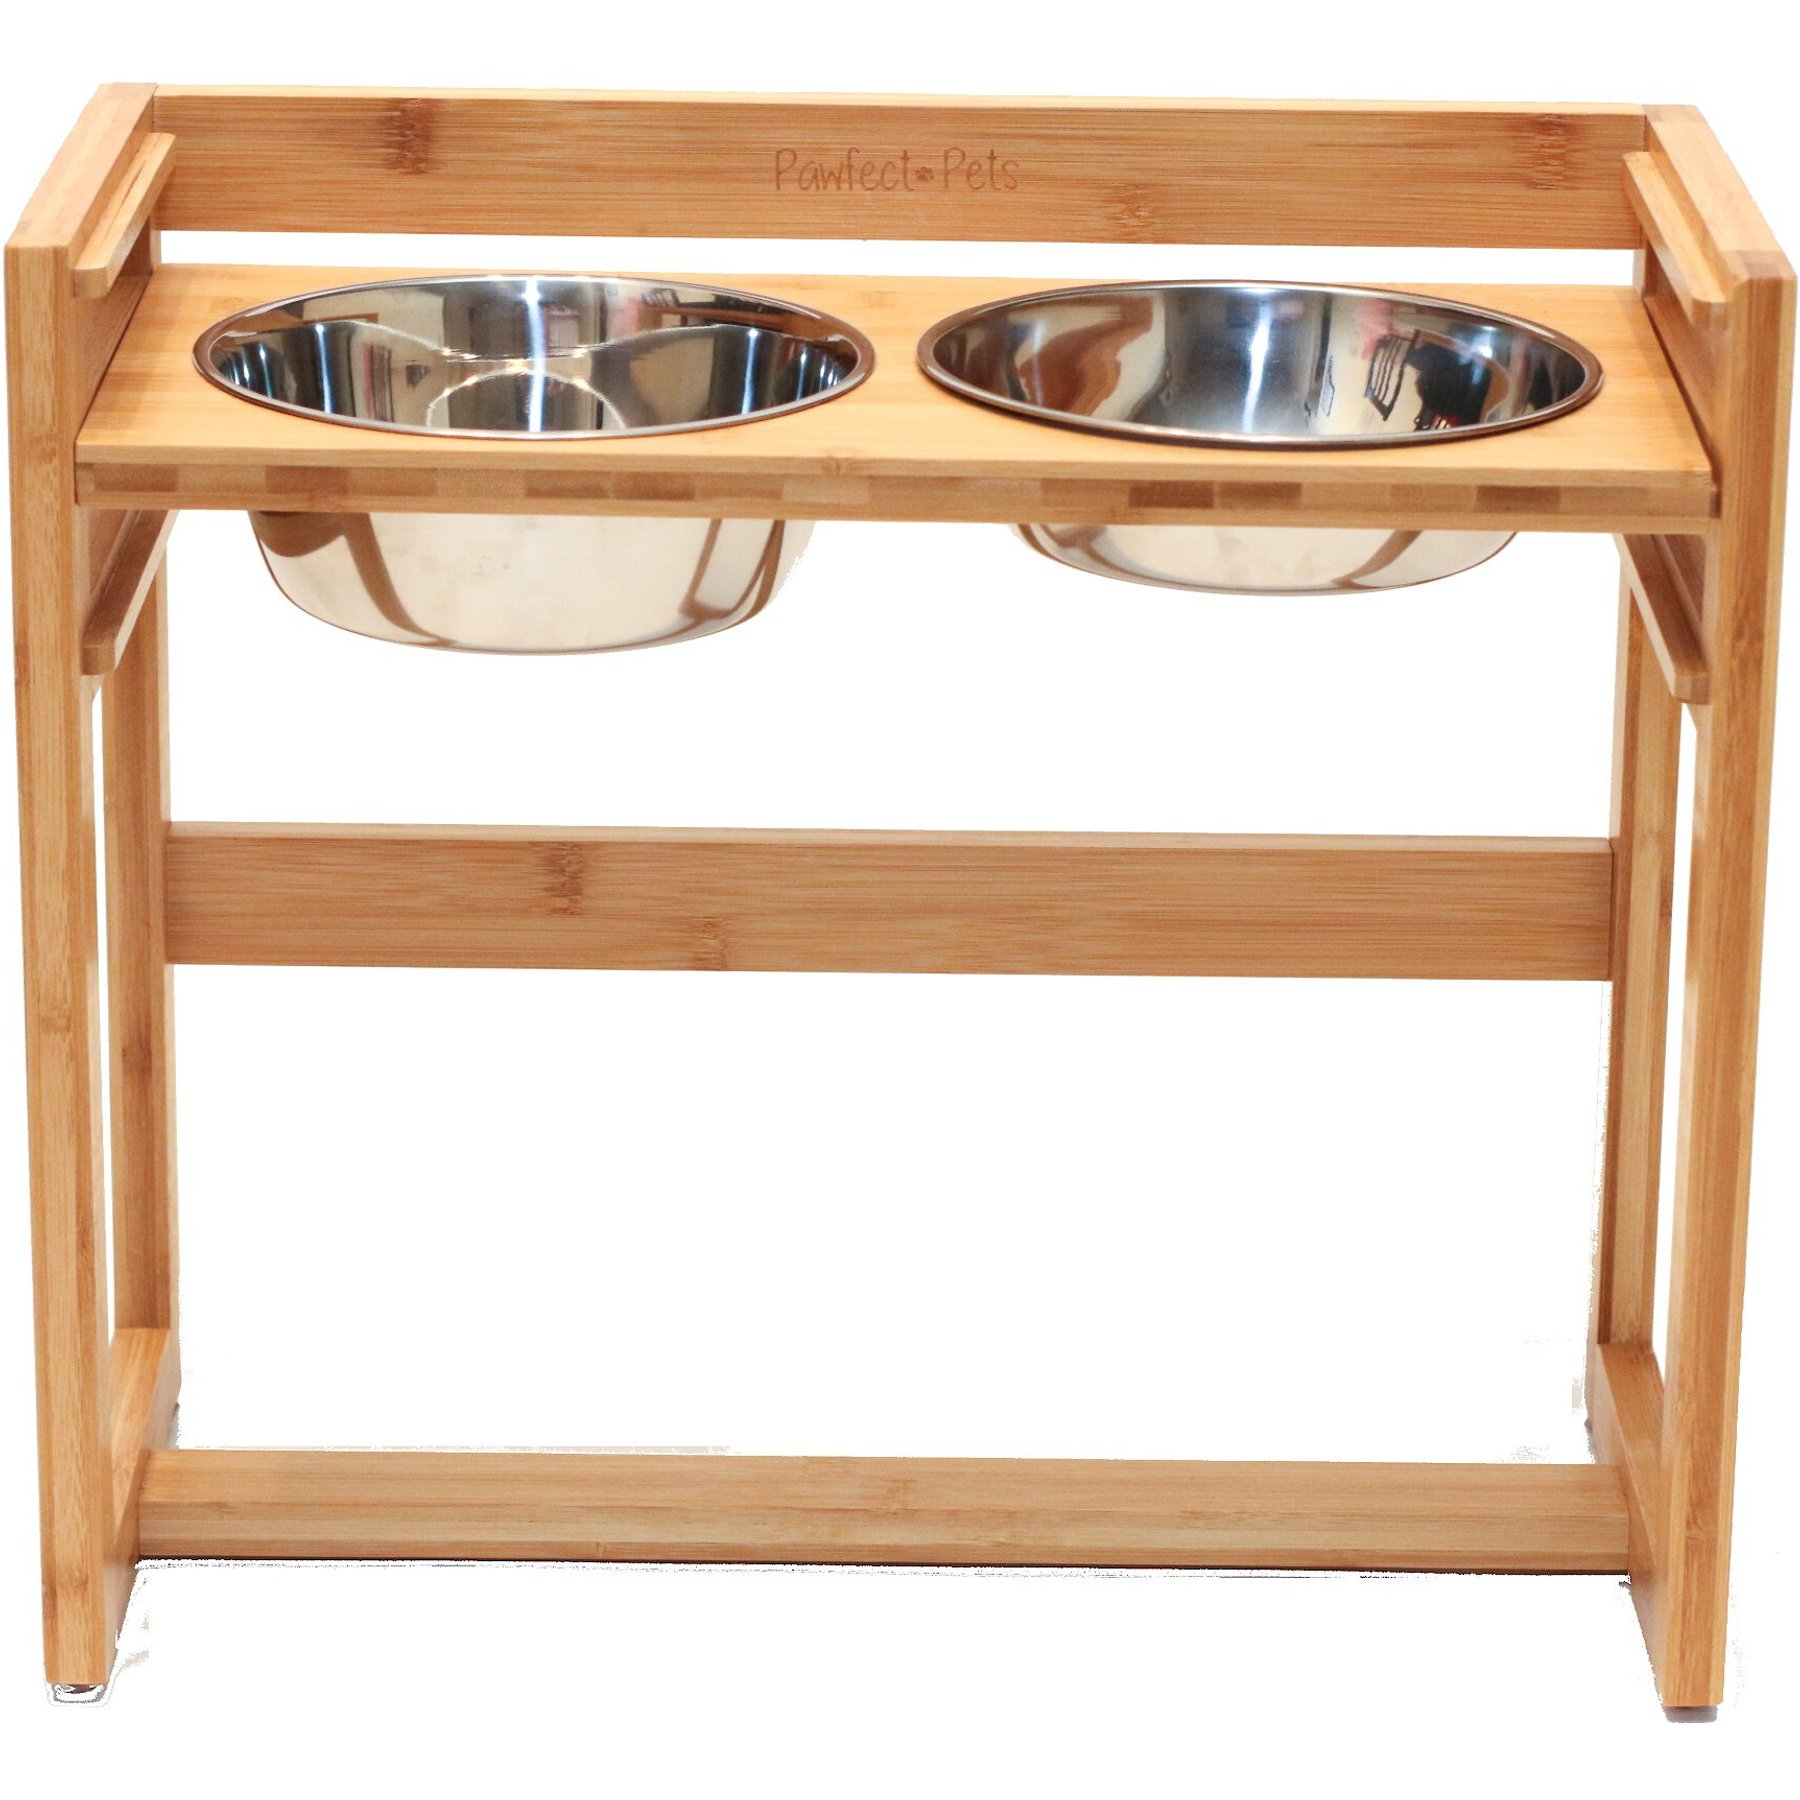 Elevated Dog Bowls,Stainless Steel Raised Dog Bowls, Adjustable to 8  Heights(2.75 up to 20''),for Small, Medium, Large,Extra Large Sized Dogs  with 2 Stainless Steel Dog Bowls for Food & Water 